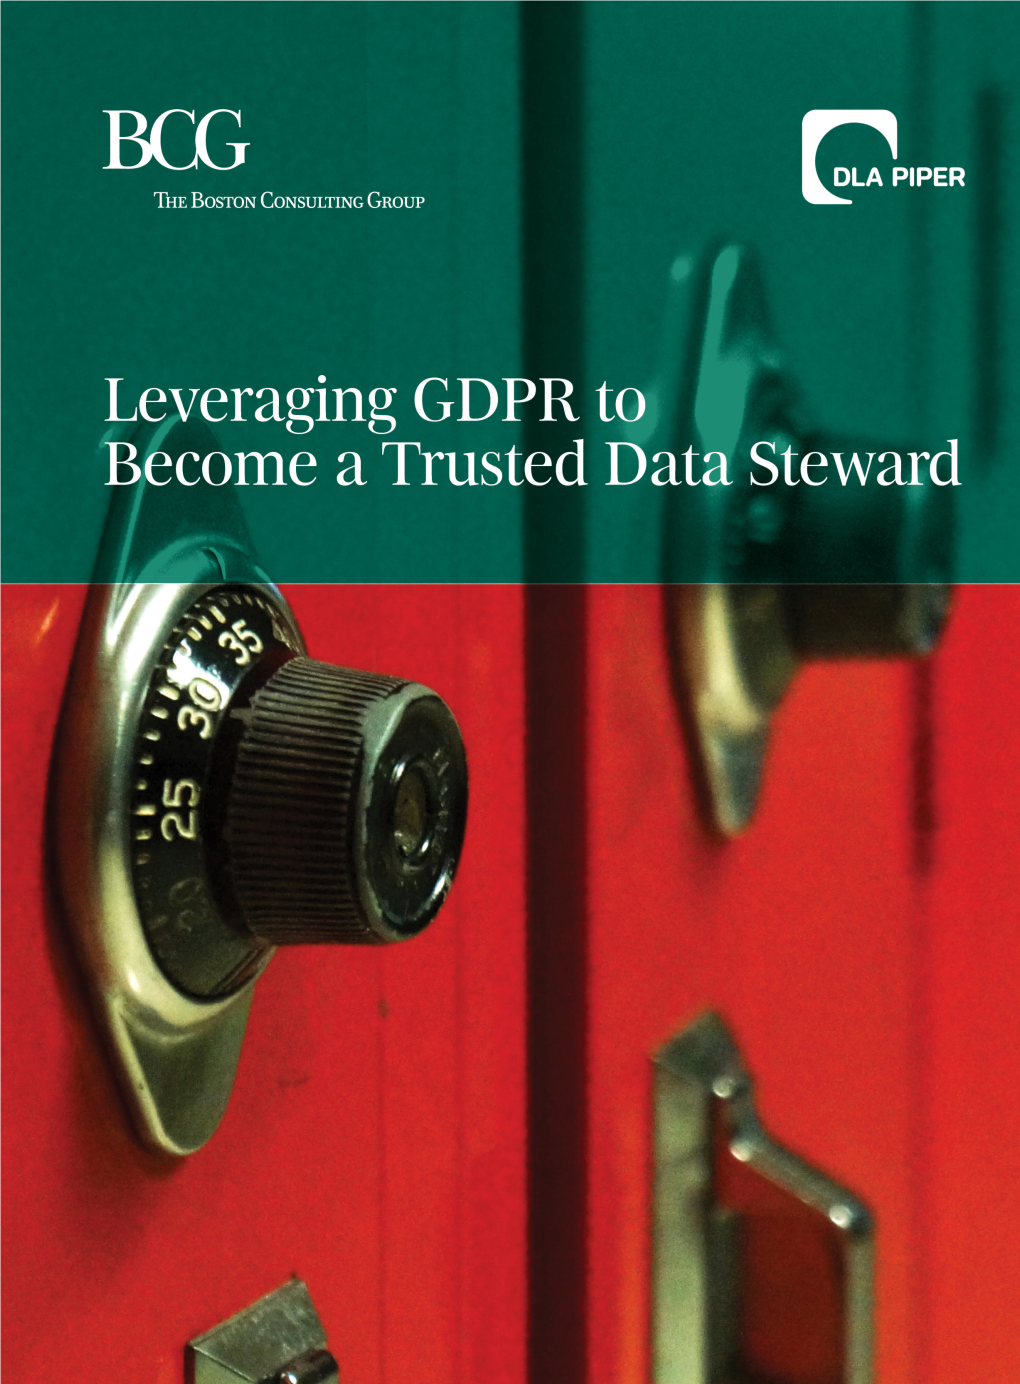 Leveraging GDPR to Become a Trusted Data Steward